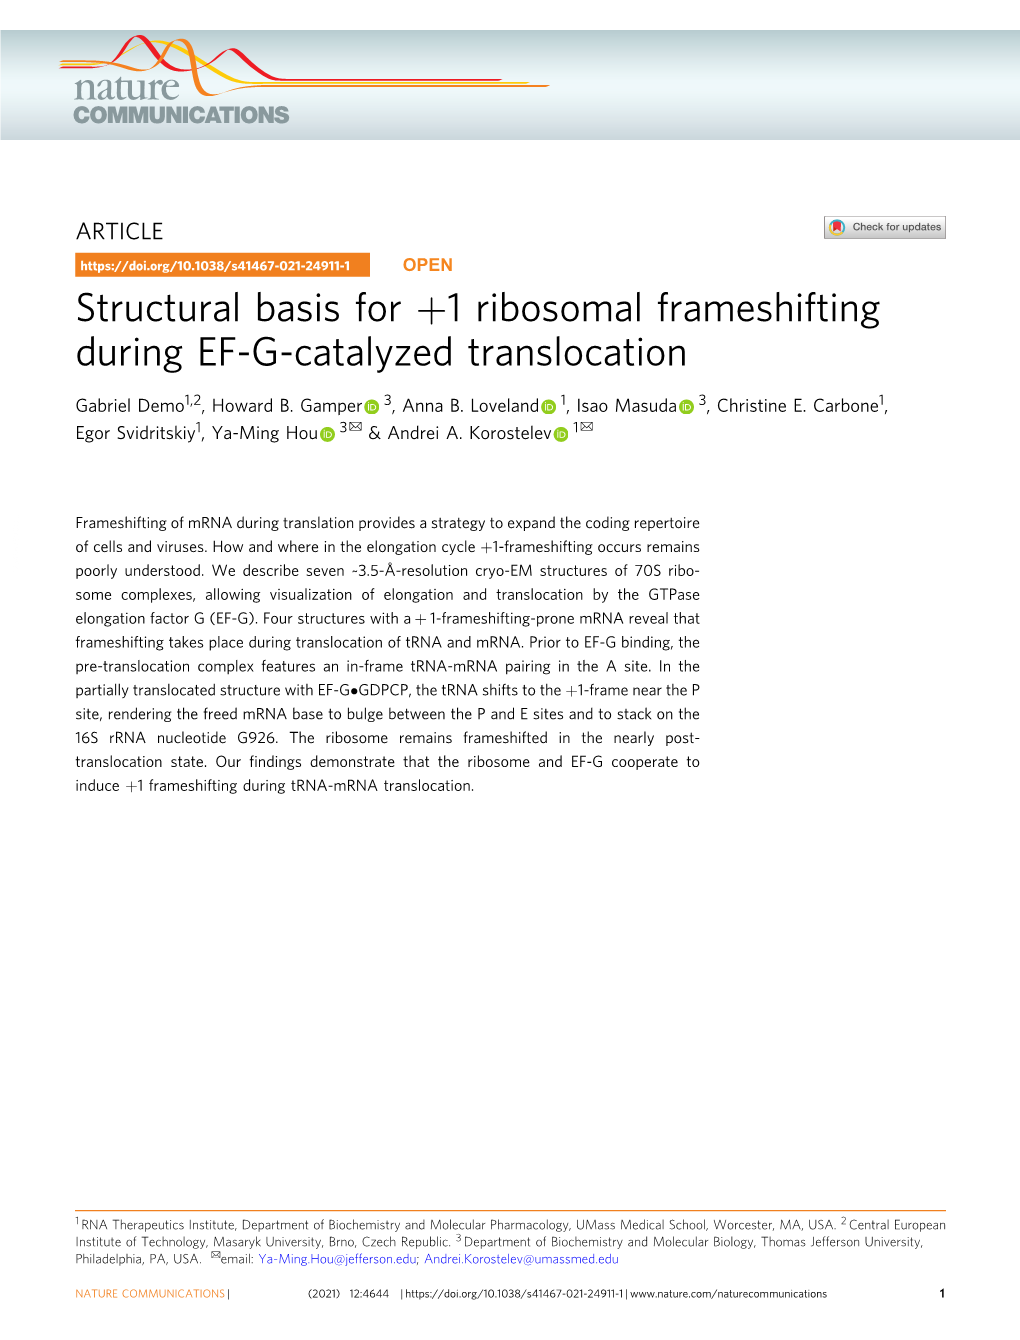 Structural Basis for +1 Ribosomal Frameshifting During EF-G-Catalyzed Translocation